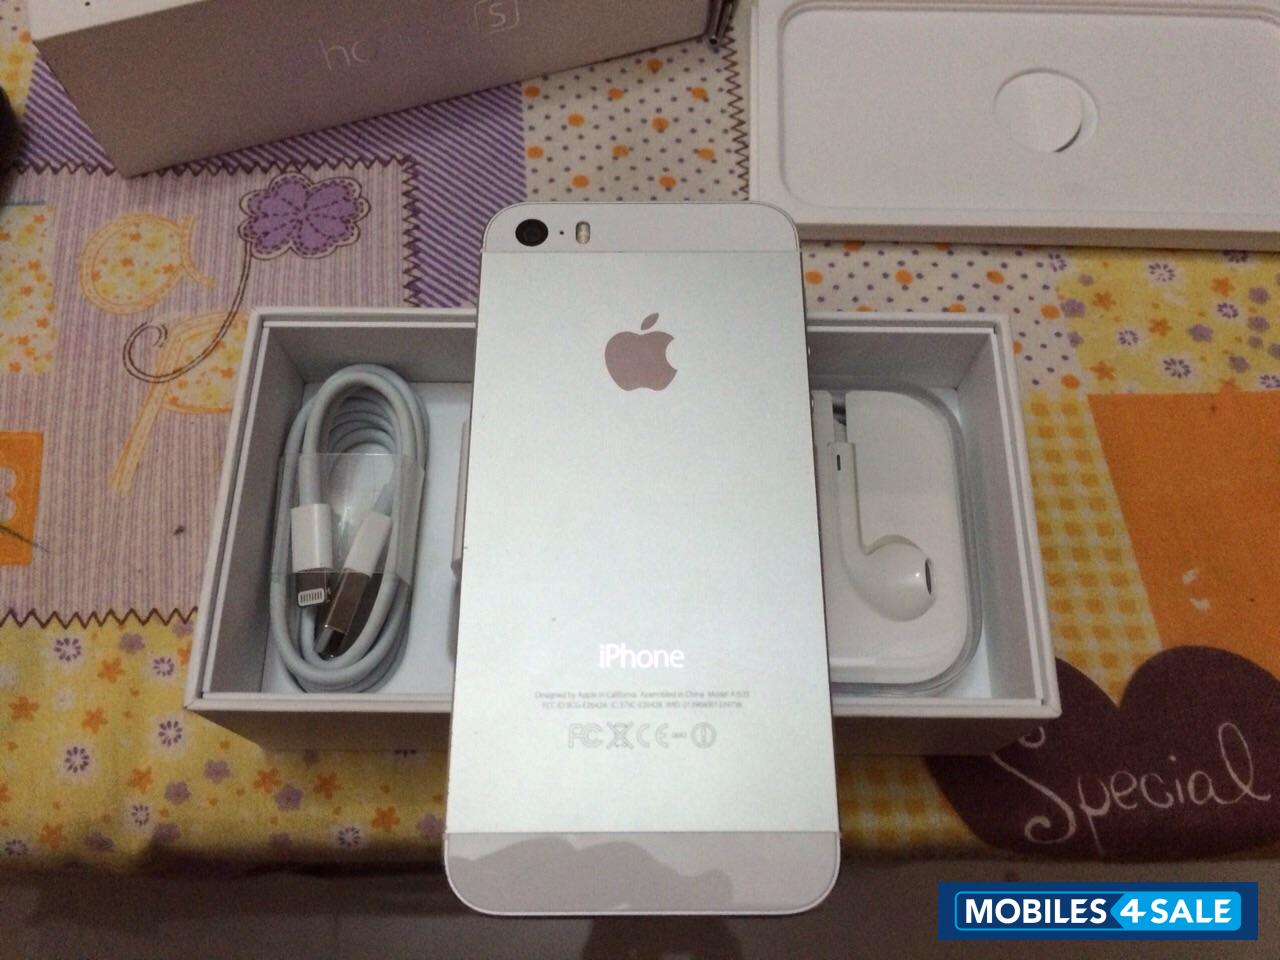 Silver/white Apple iPhone 5S